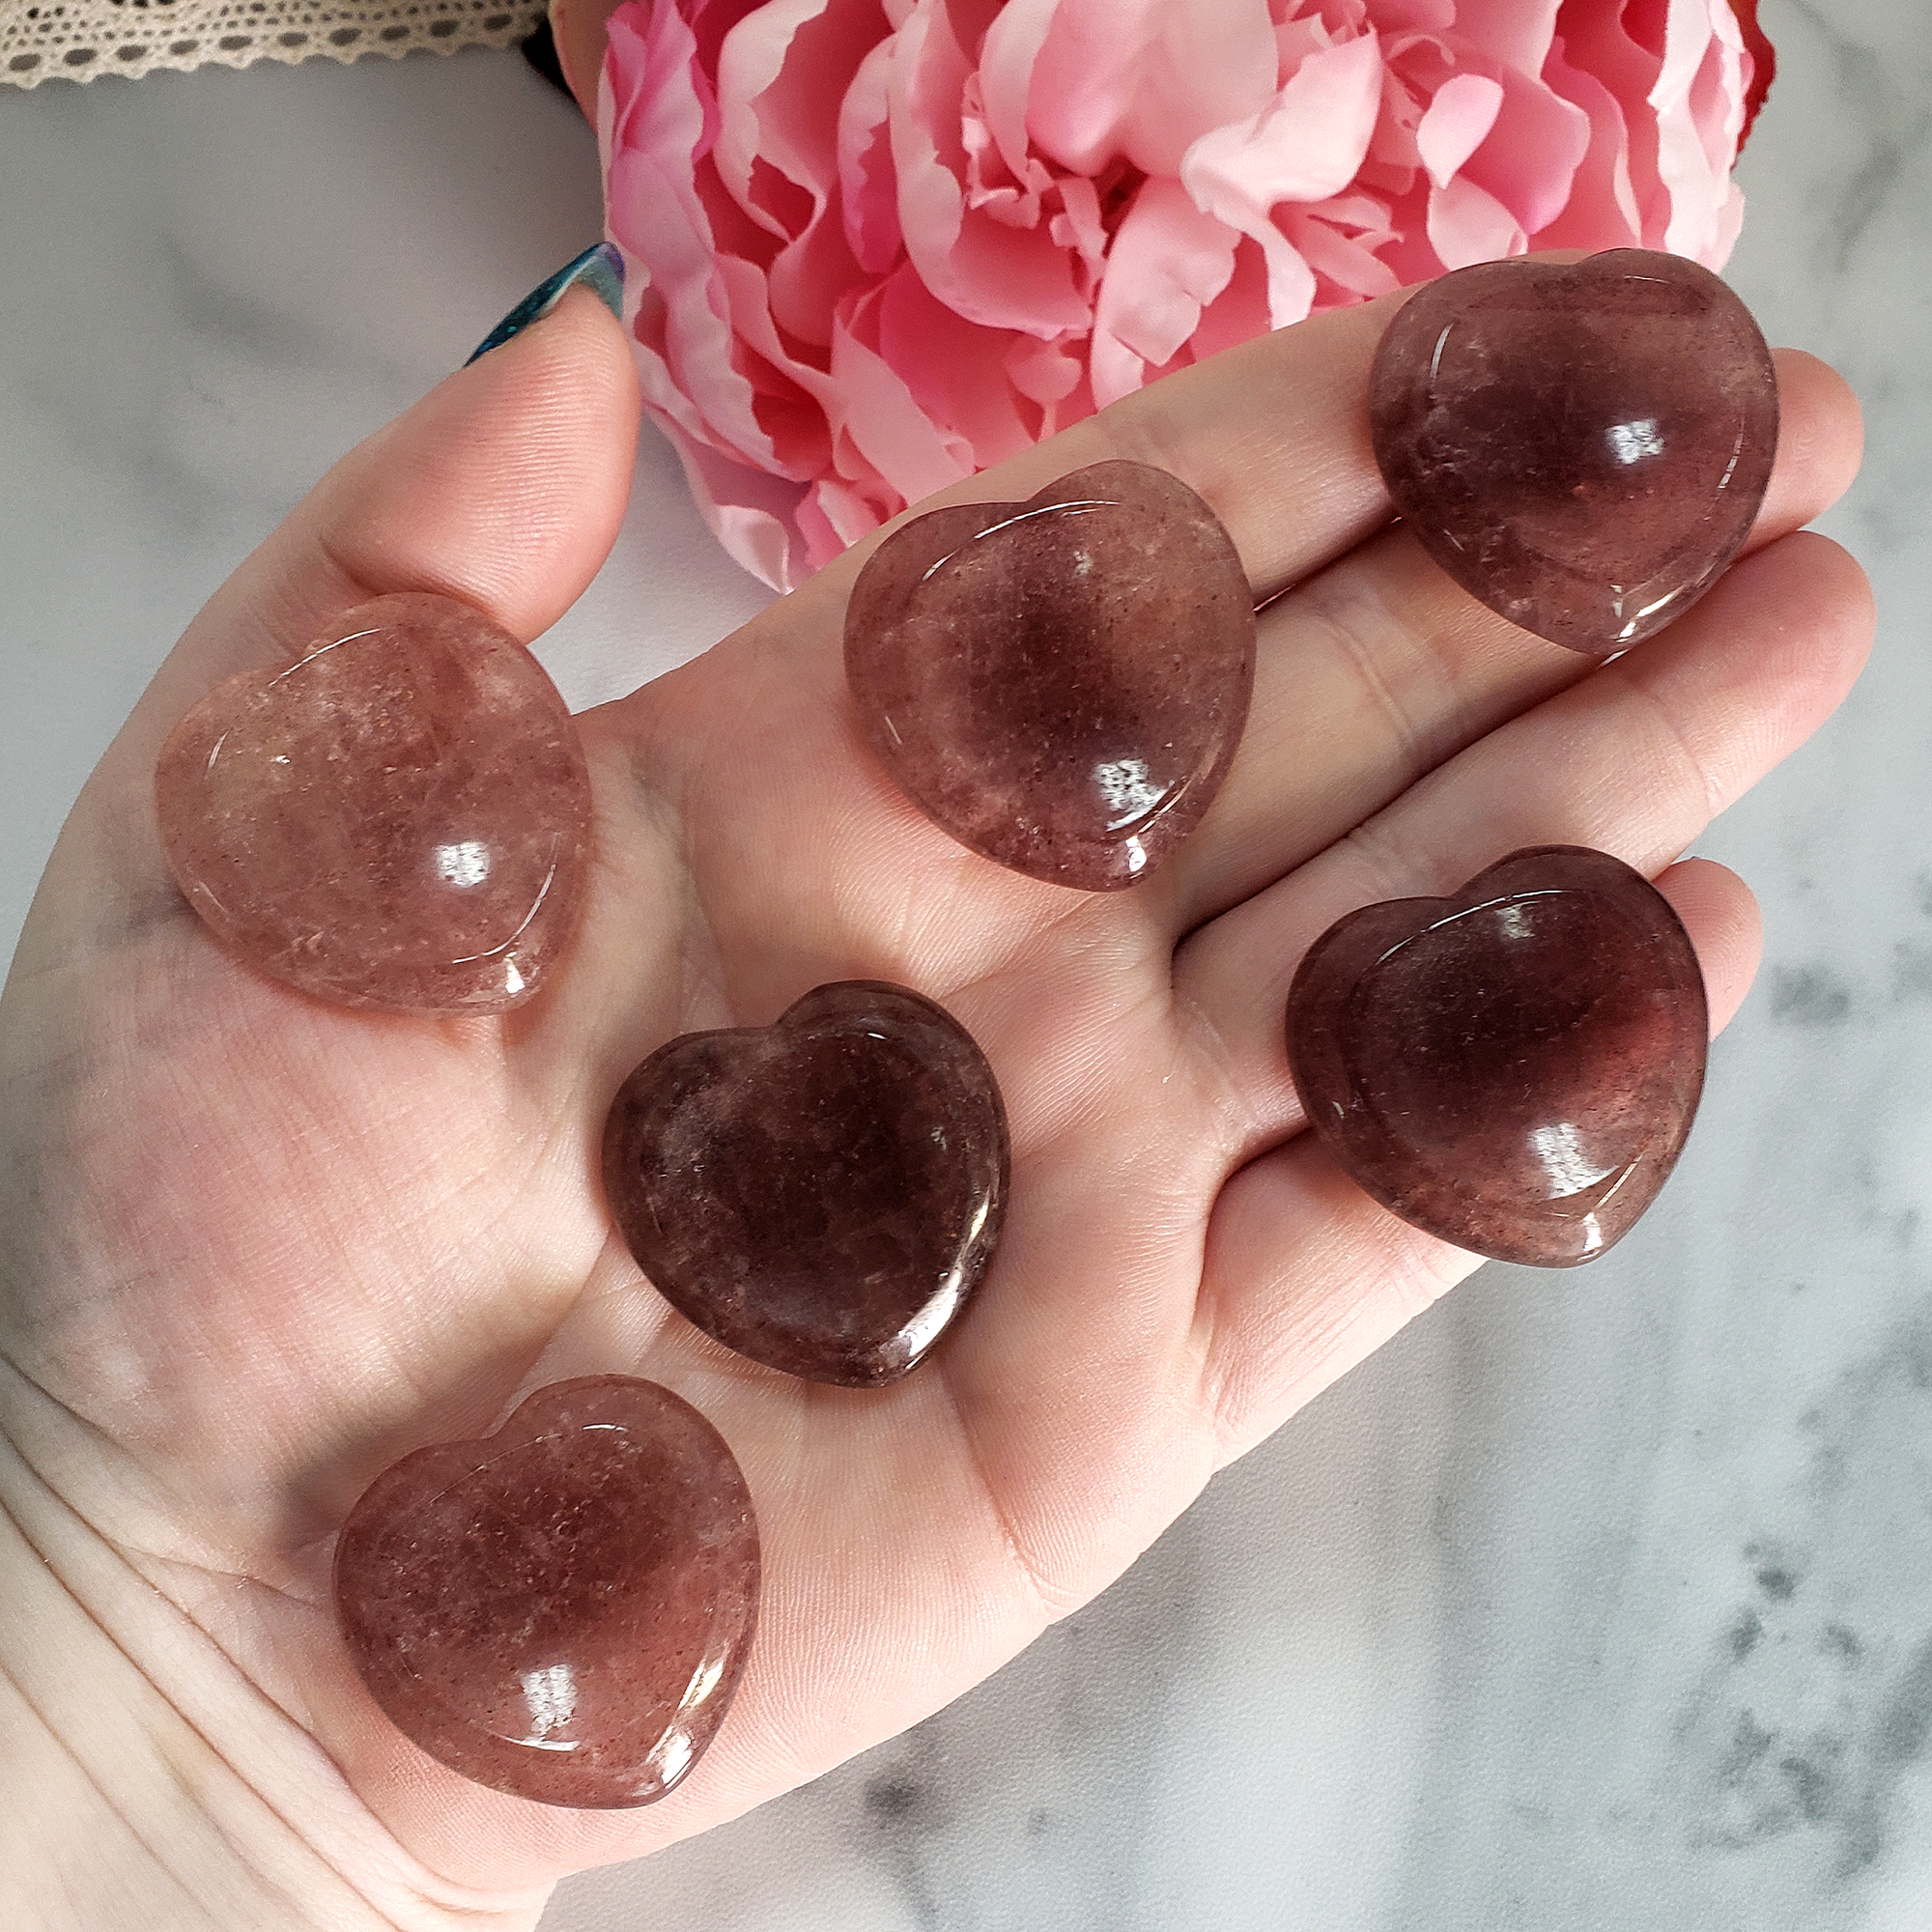 Strawberry Quartz Crystal Heart Shaped Worry Stone - Crystal Palm Stones in Hand